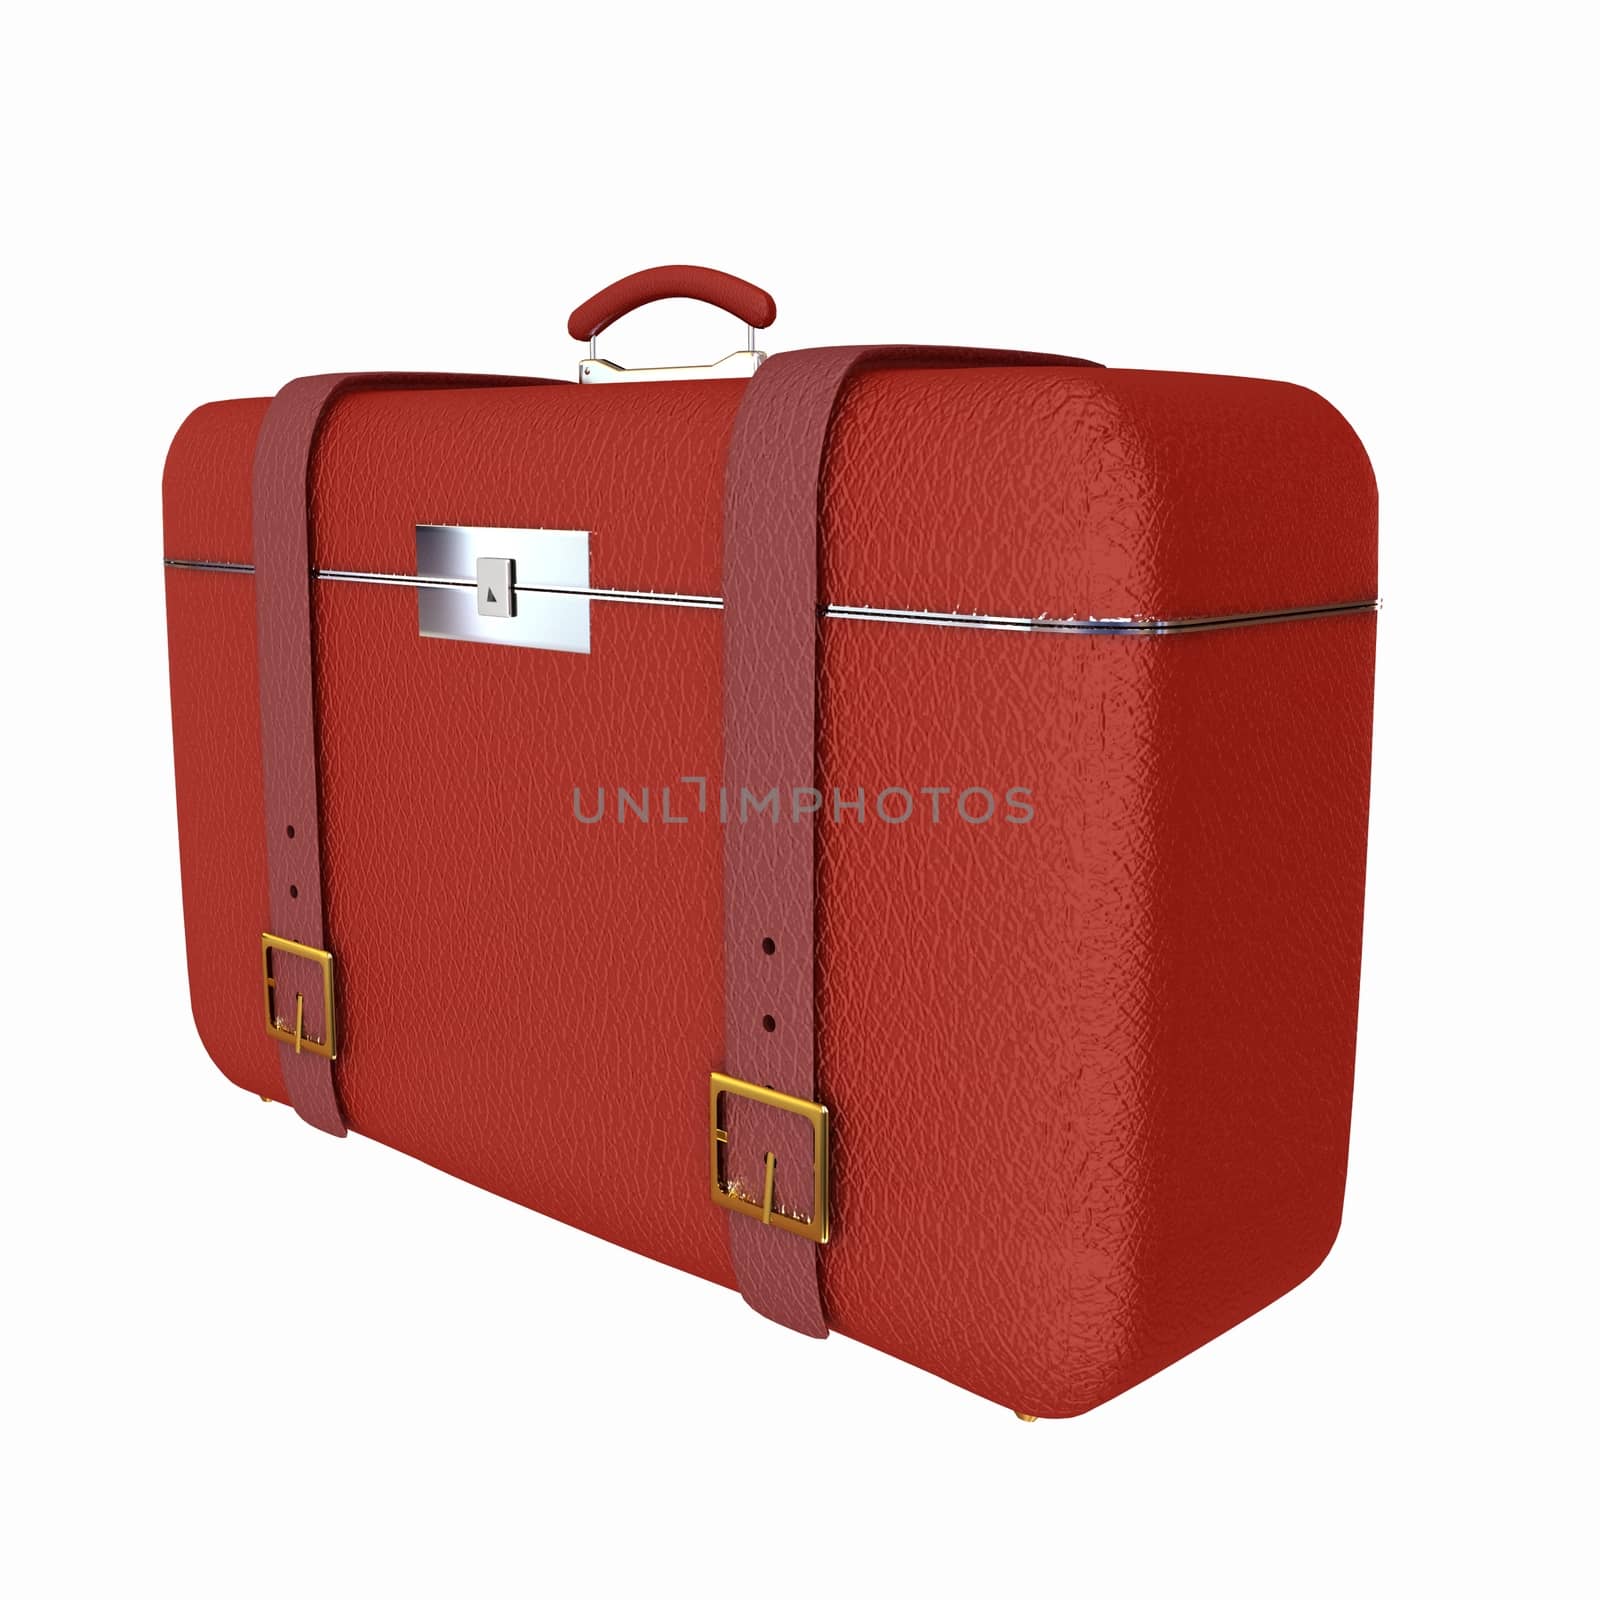 Red traveler's suitcase on a white background